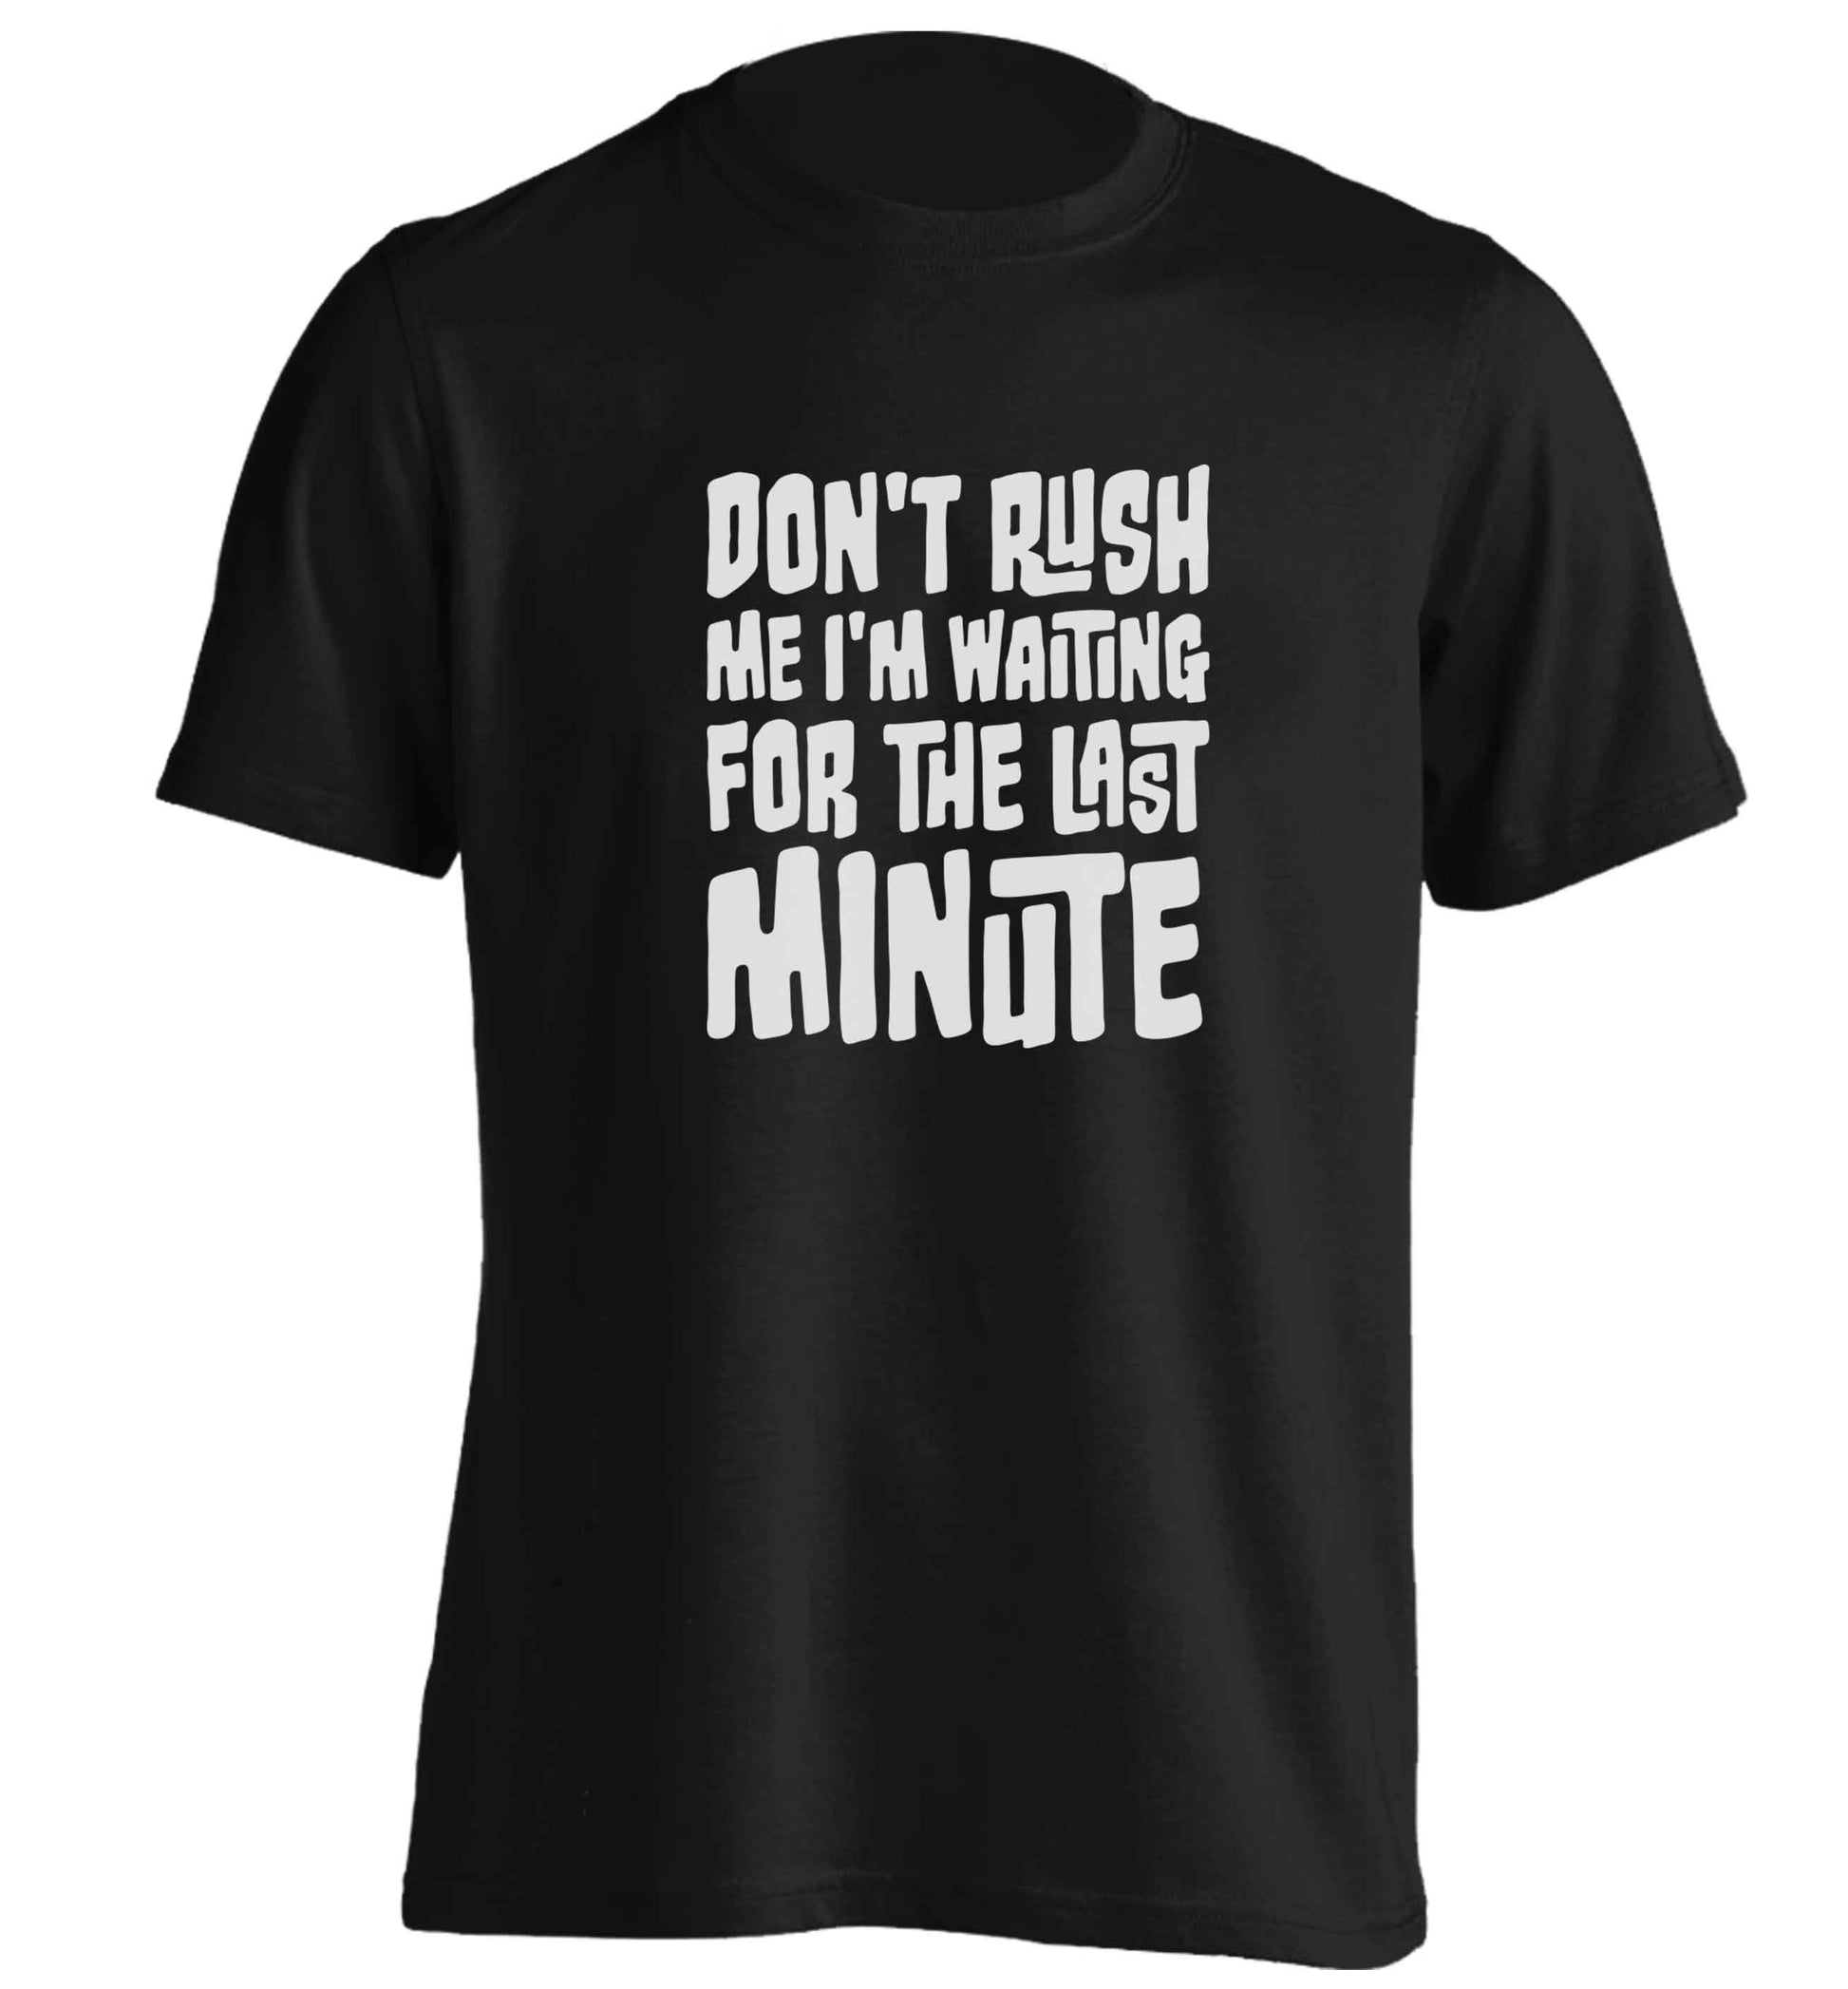 Don't rush me I'm waiting for the last minute adults unisex black Tshirt 2XL